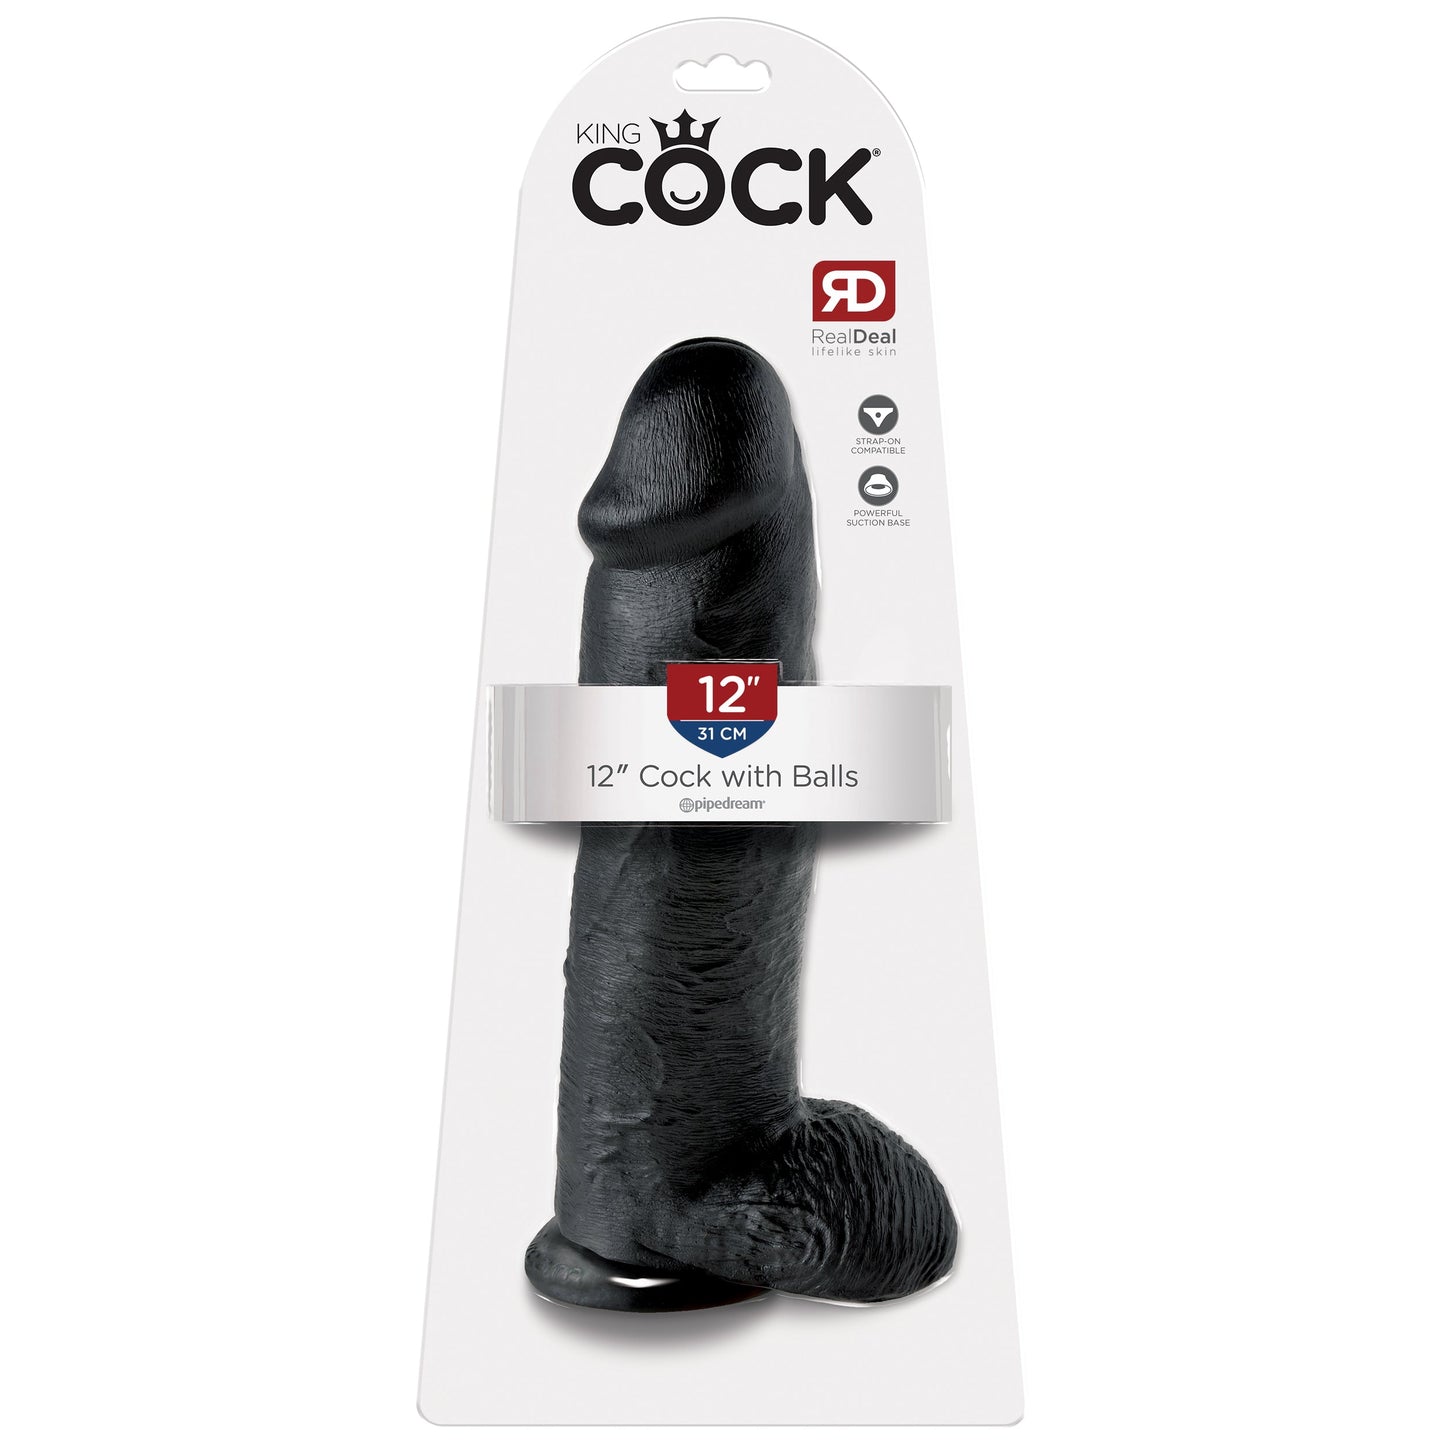 King Cock 12 Inch Cock With Balls - Black